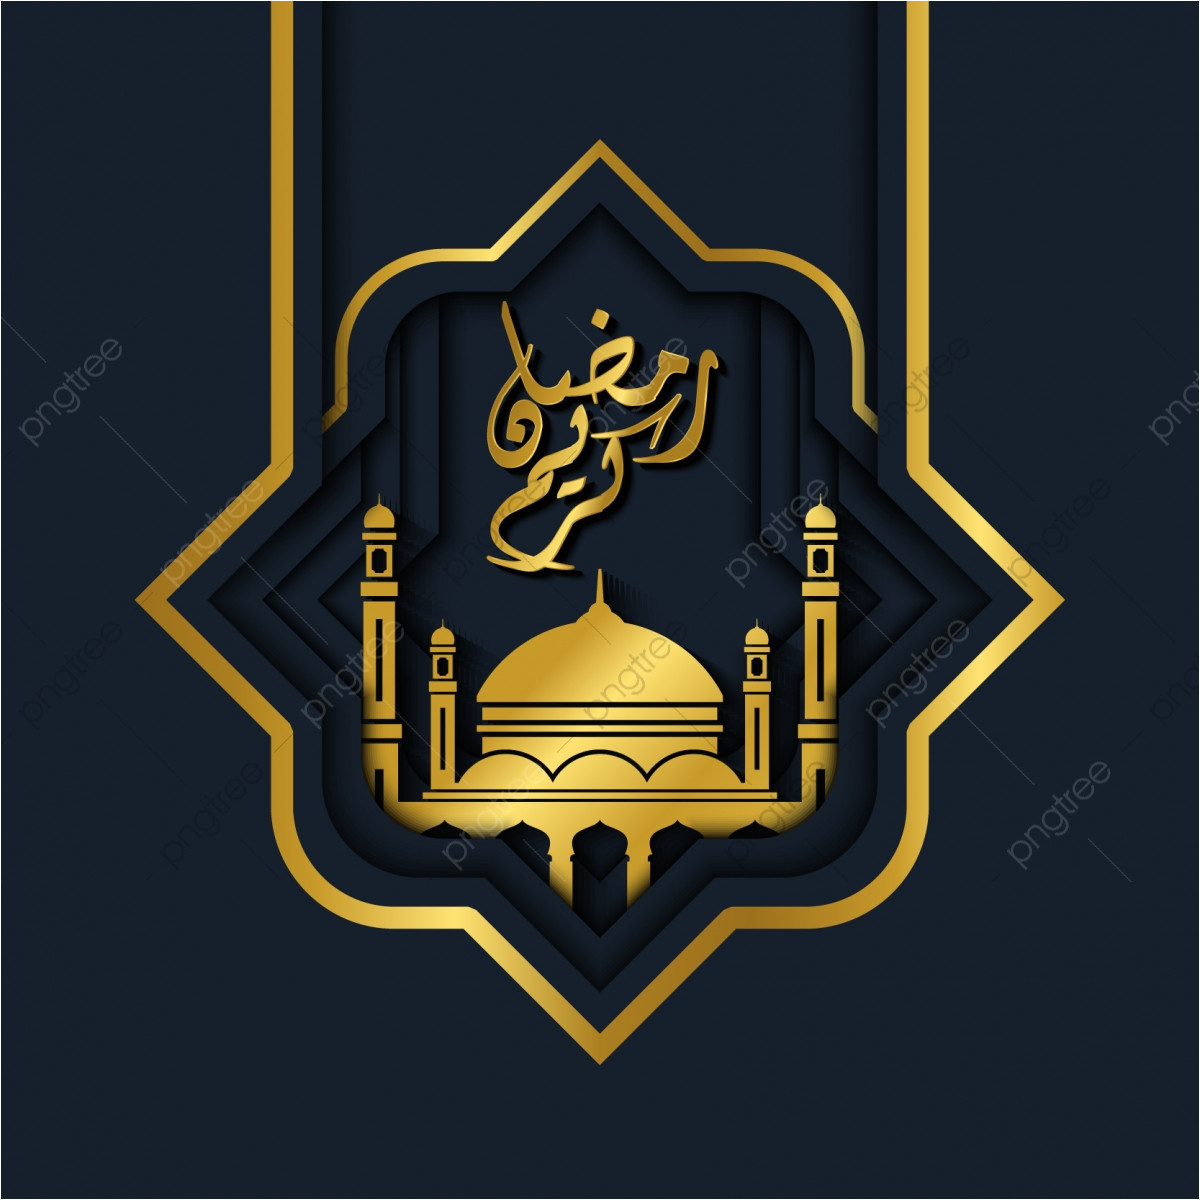 pngtree ramadan kareem islamic design with calligraphy and mosque illustration vector in png image 4173263 jpg